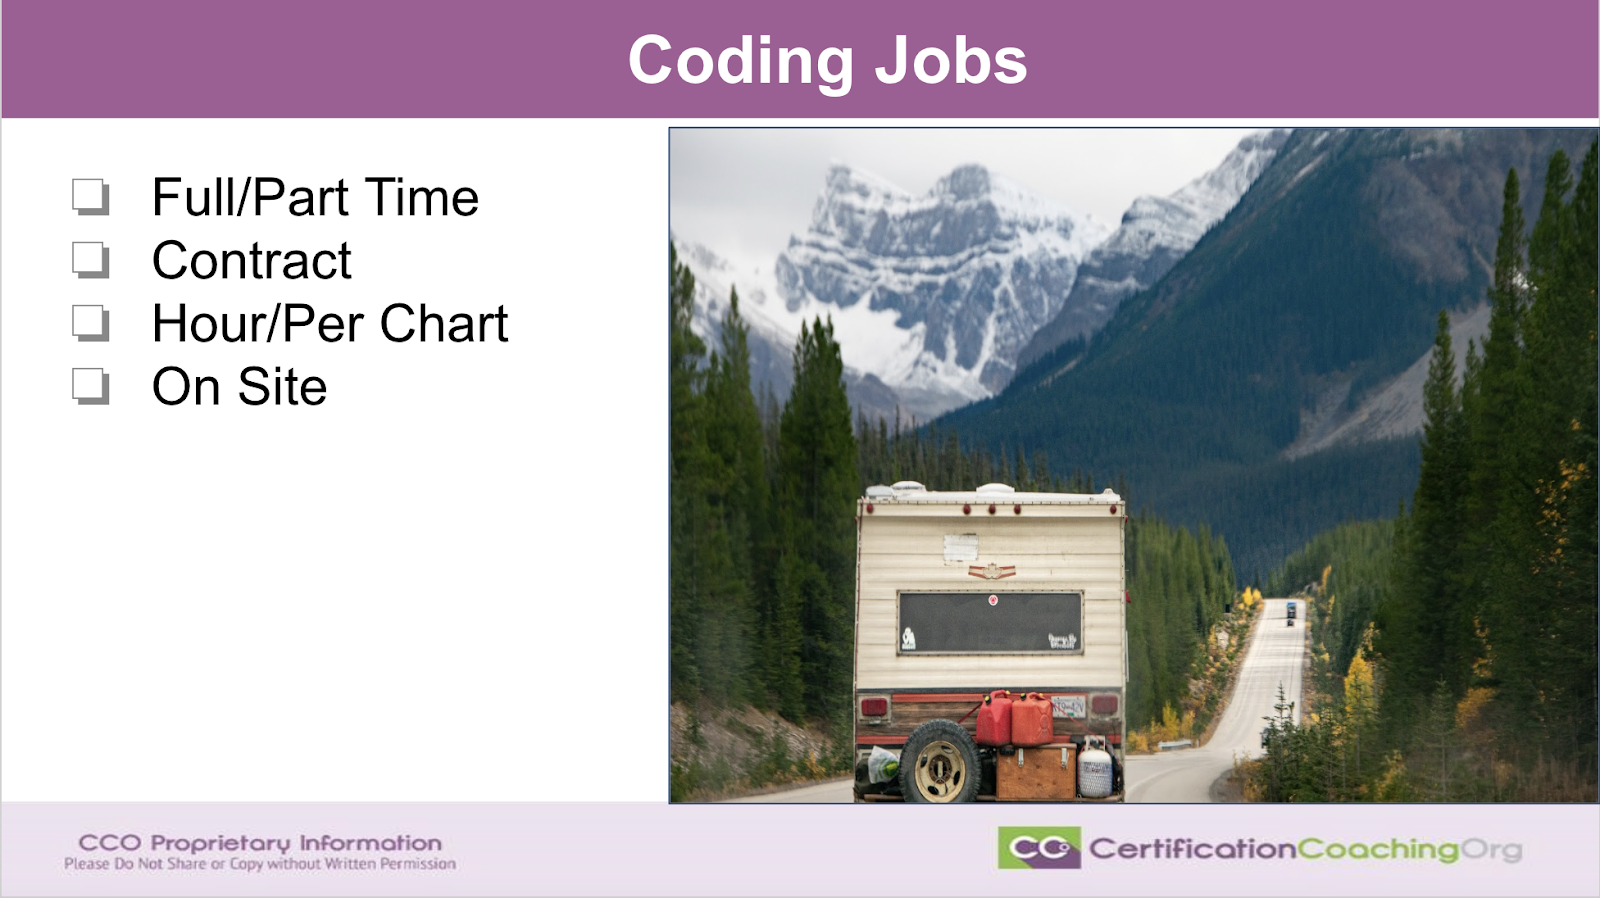 Coding Jobs for a Traveling Medical Coder